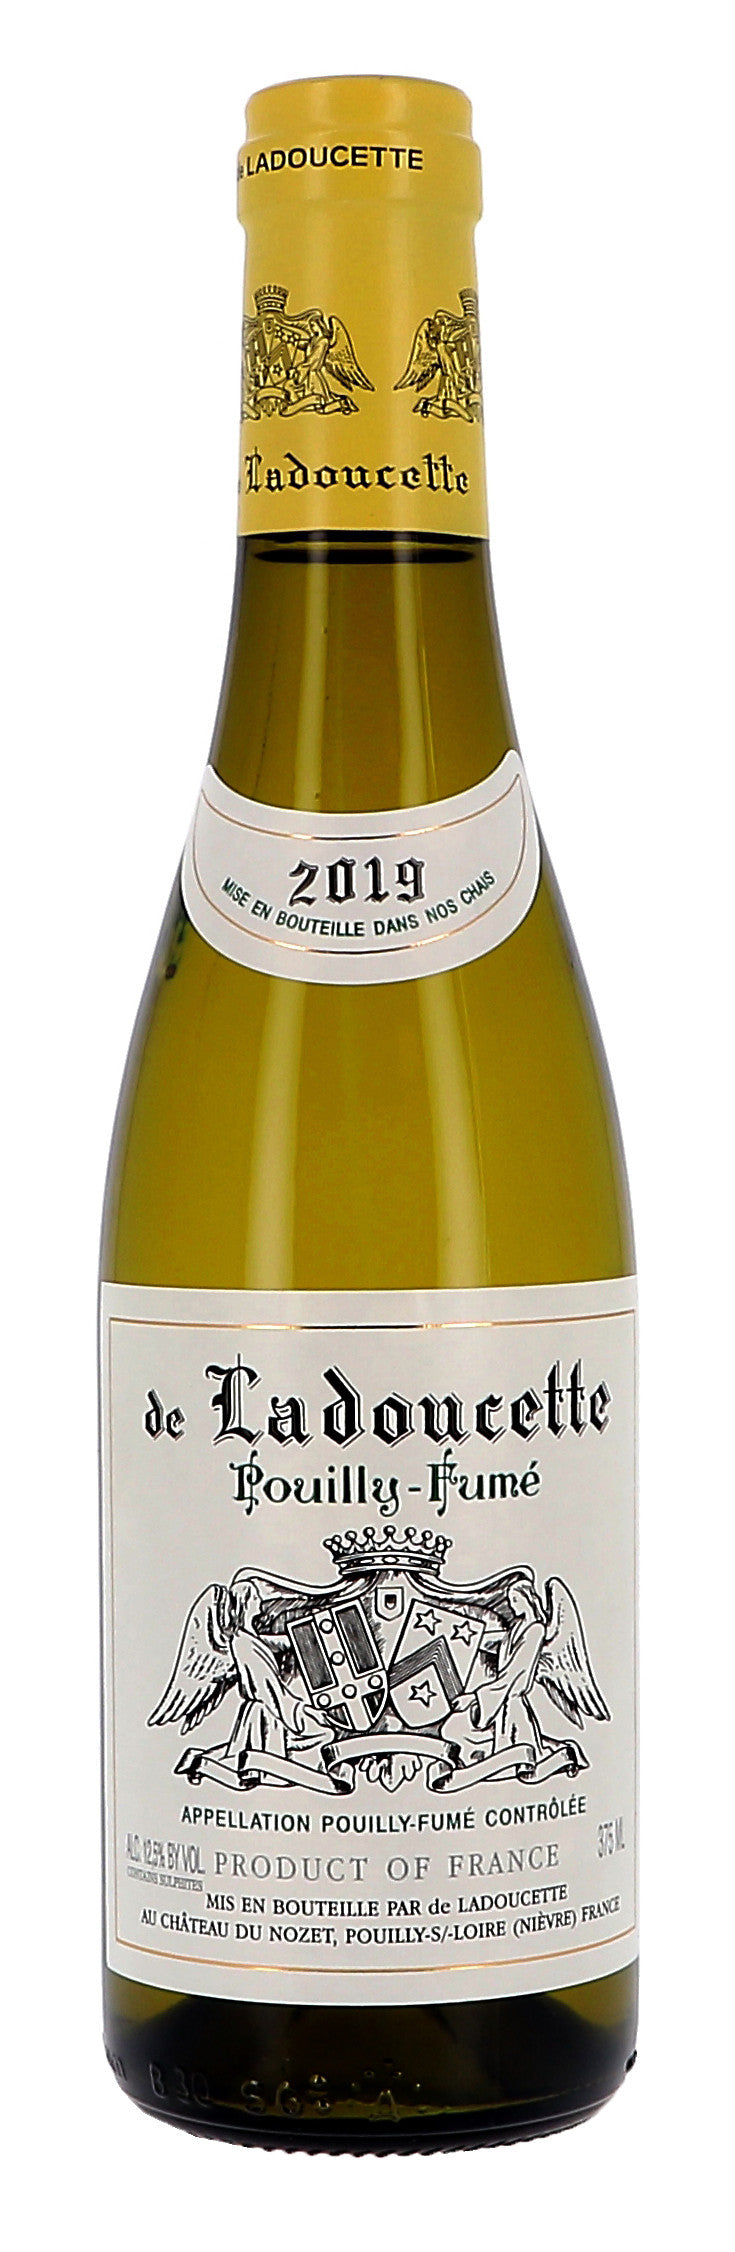 Buy wholesale Le Petit Bac - Edition over 18 years old